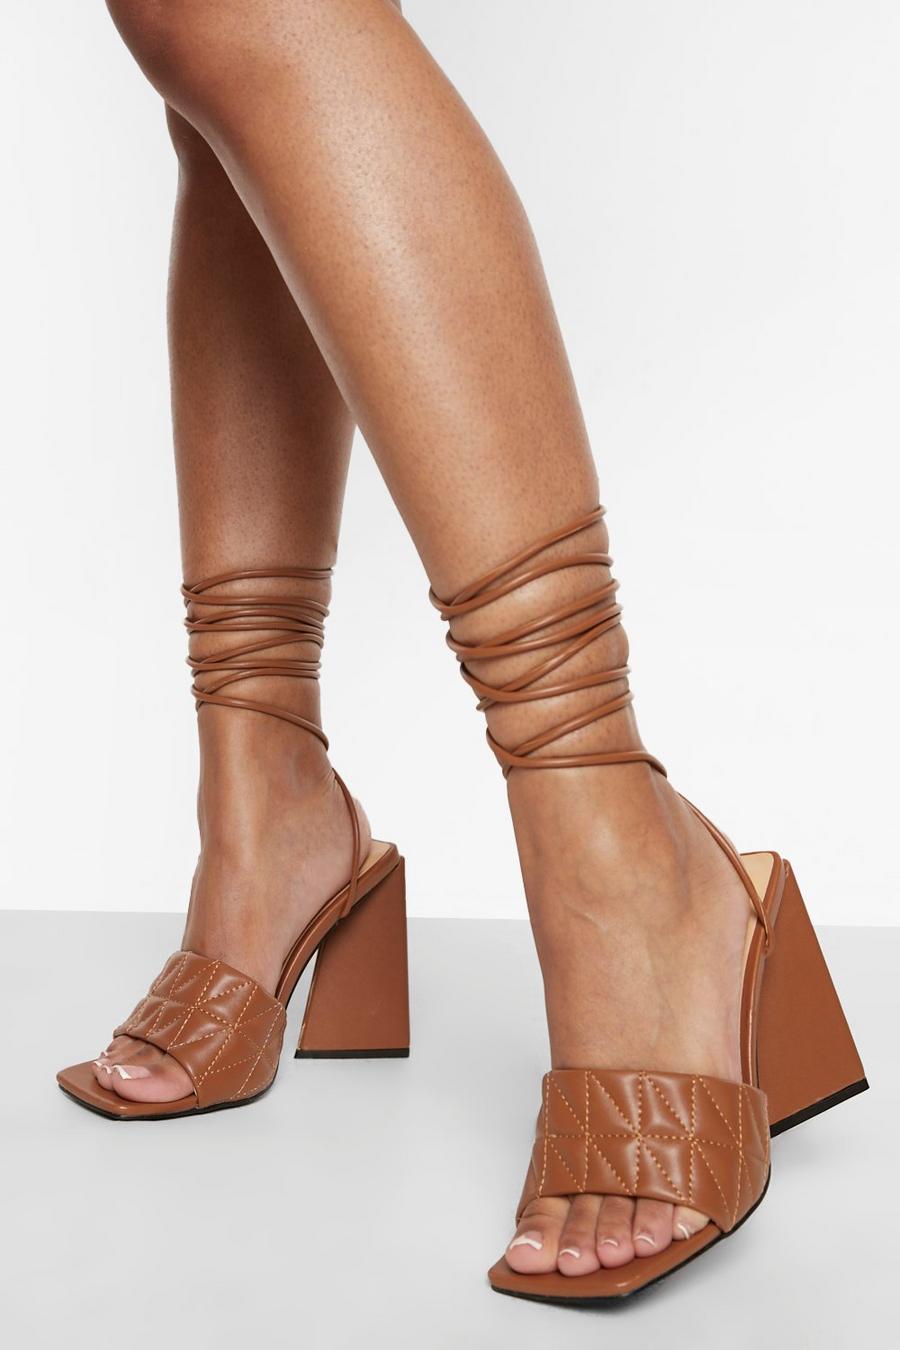 Chocolate marron Quilted Strap Wrap Up Heels